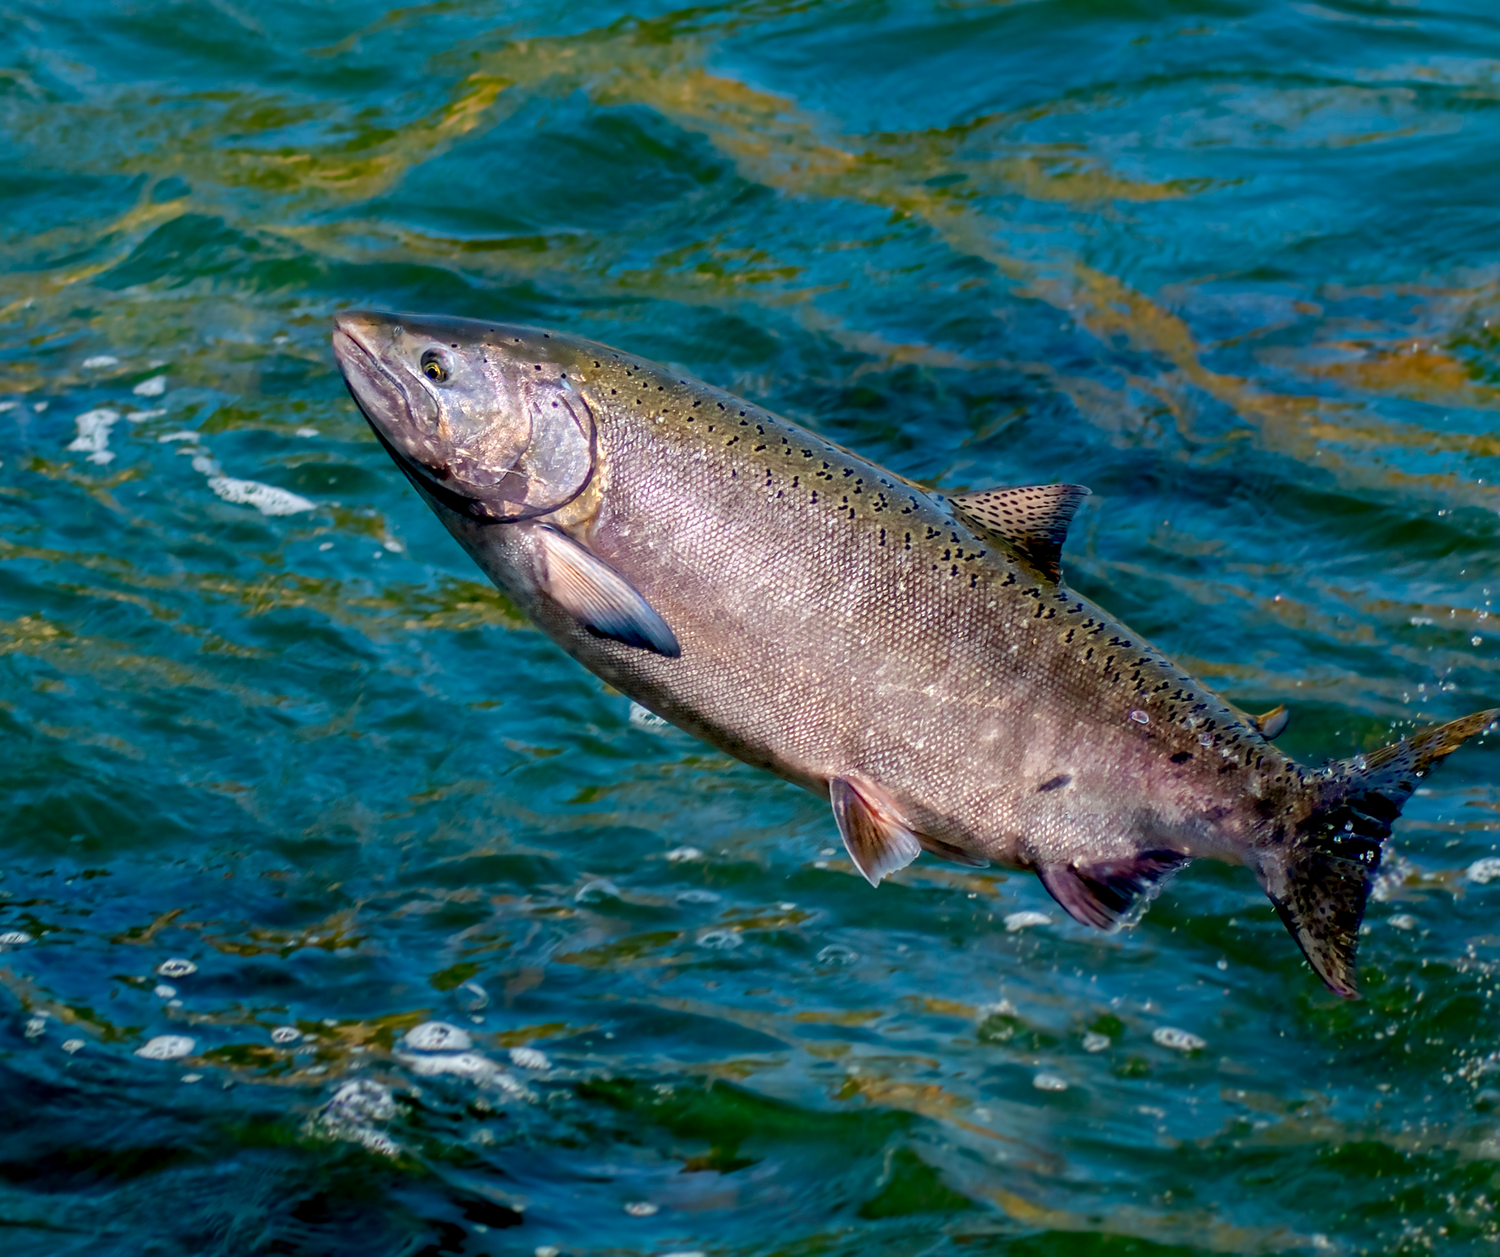 Possible Link Between Chemical in Tires and Salmon Deaths Raises Concerns in West Vancouver